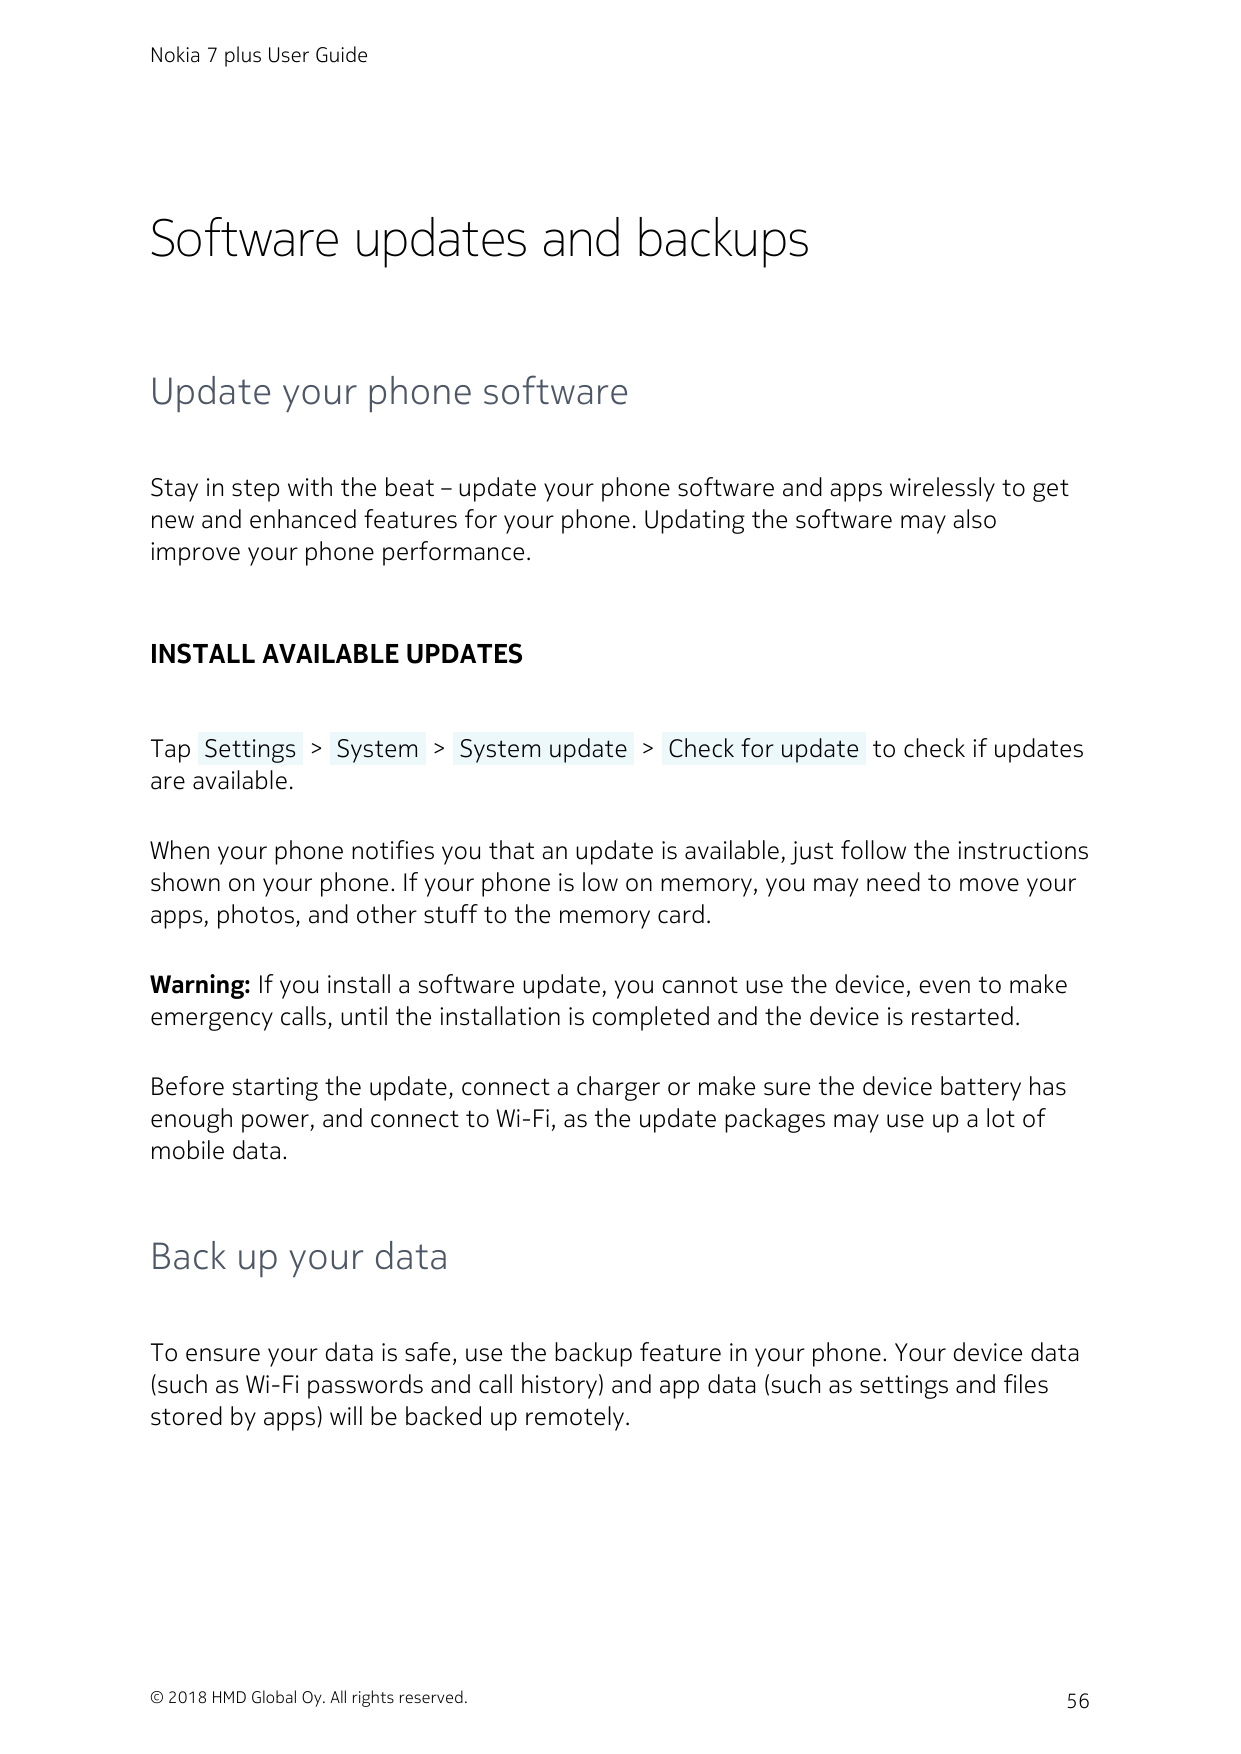 Nokia 7 plus User GuideSoftware updates and backupsUpdate your phone softwareStay in step with the beat – update your phone soft